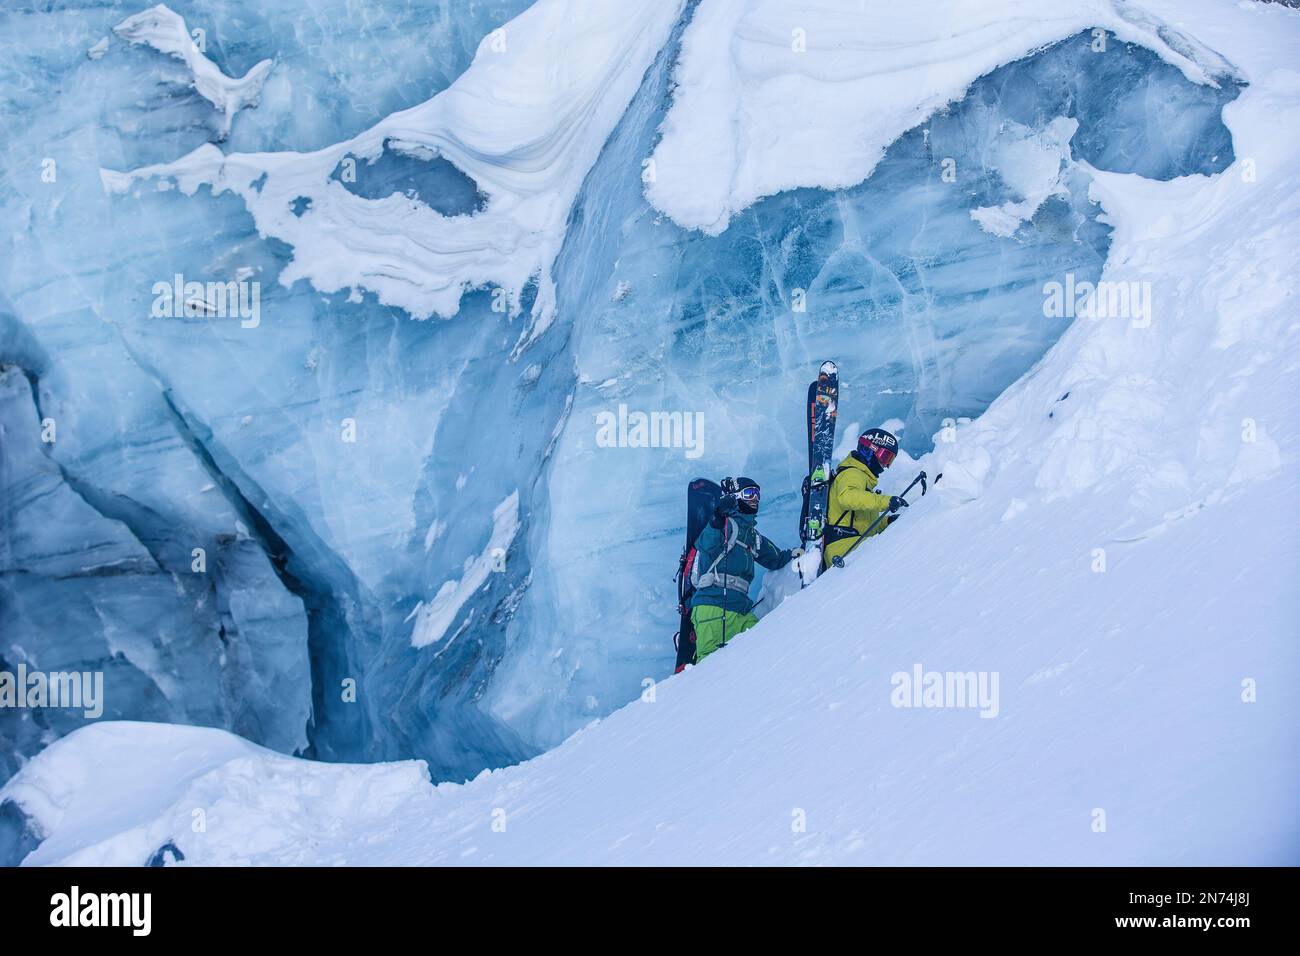 Two professional snowboarders and skiers explore and ski a crevasse / ice cave high up on the Pitztal glacier, Pitztal, Tyrol, Austria Stock Photo